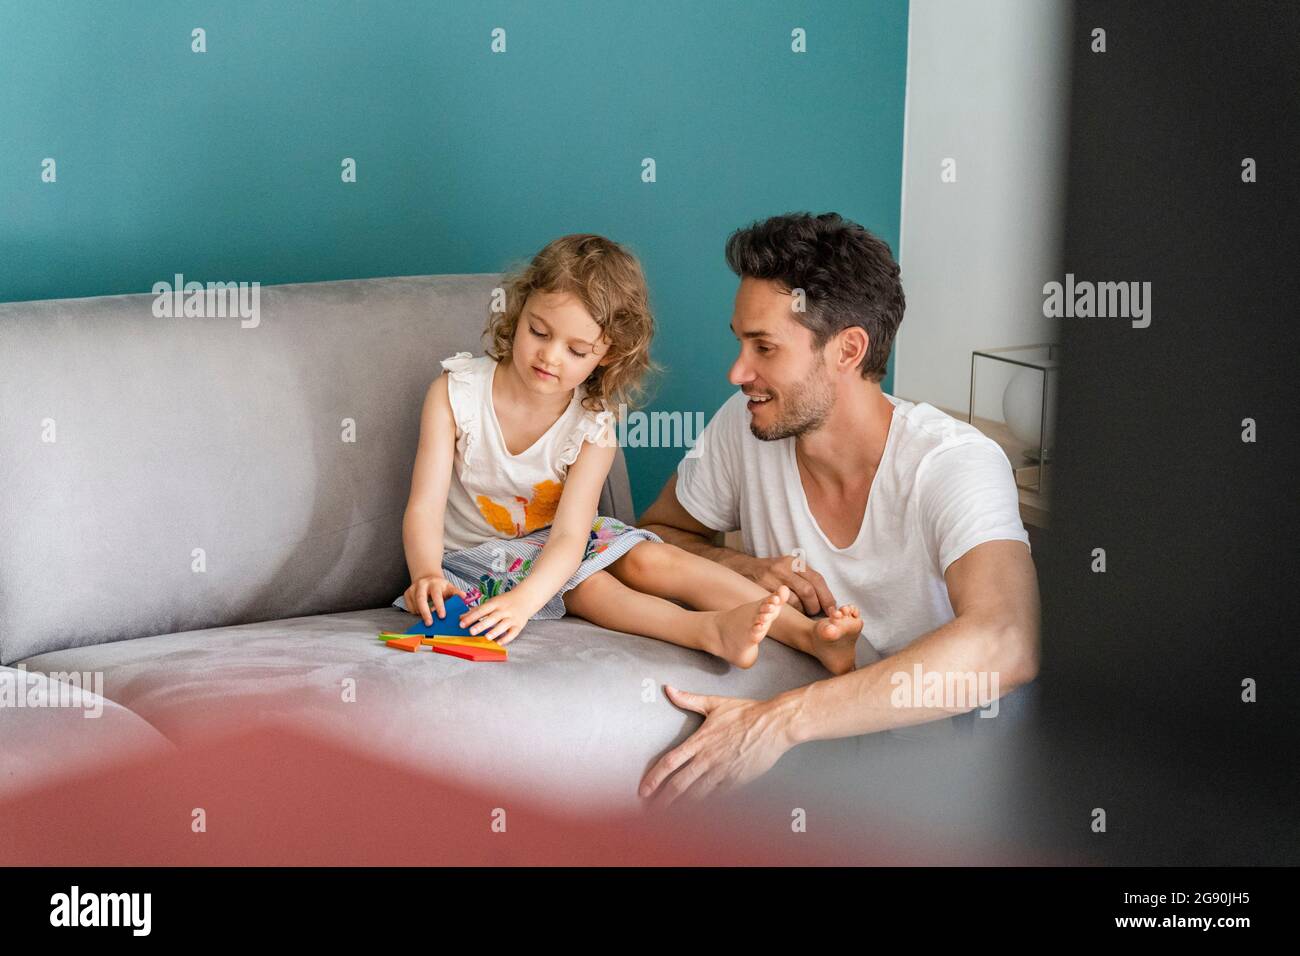 Daughter playing with puzzle while sitting by father in living room Stock Photo